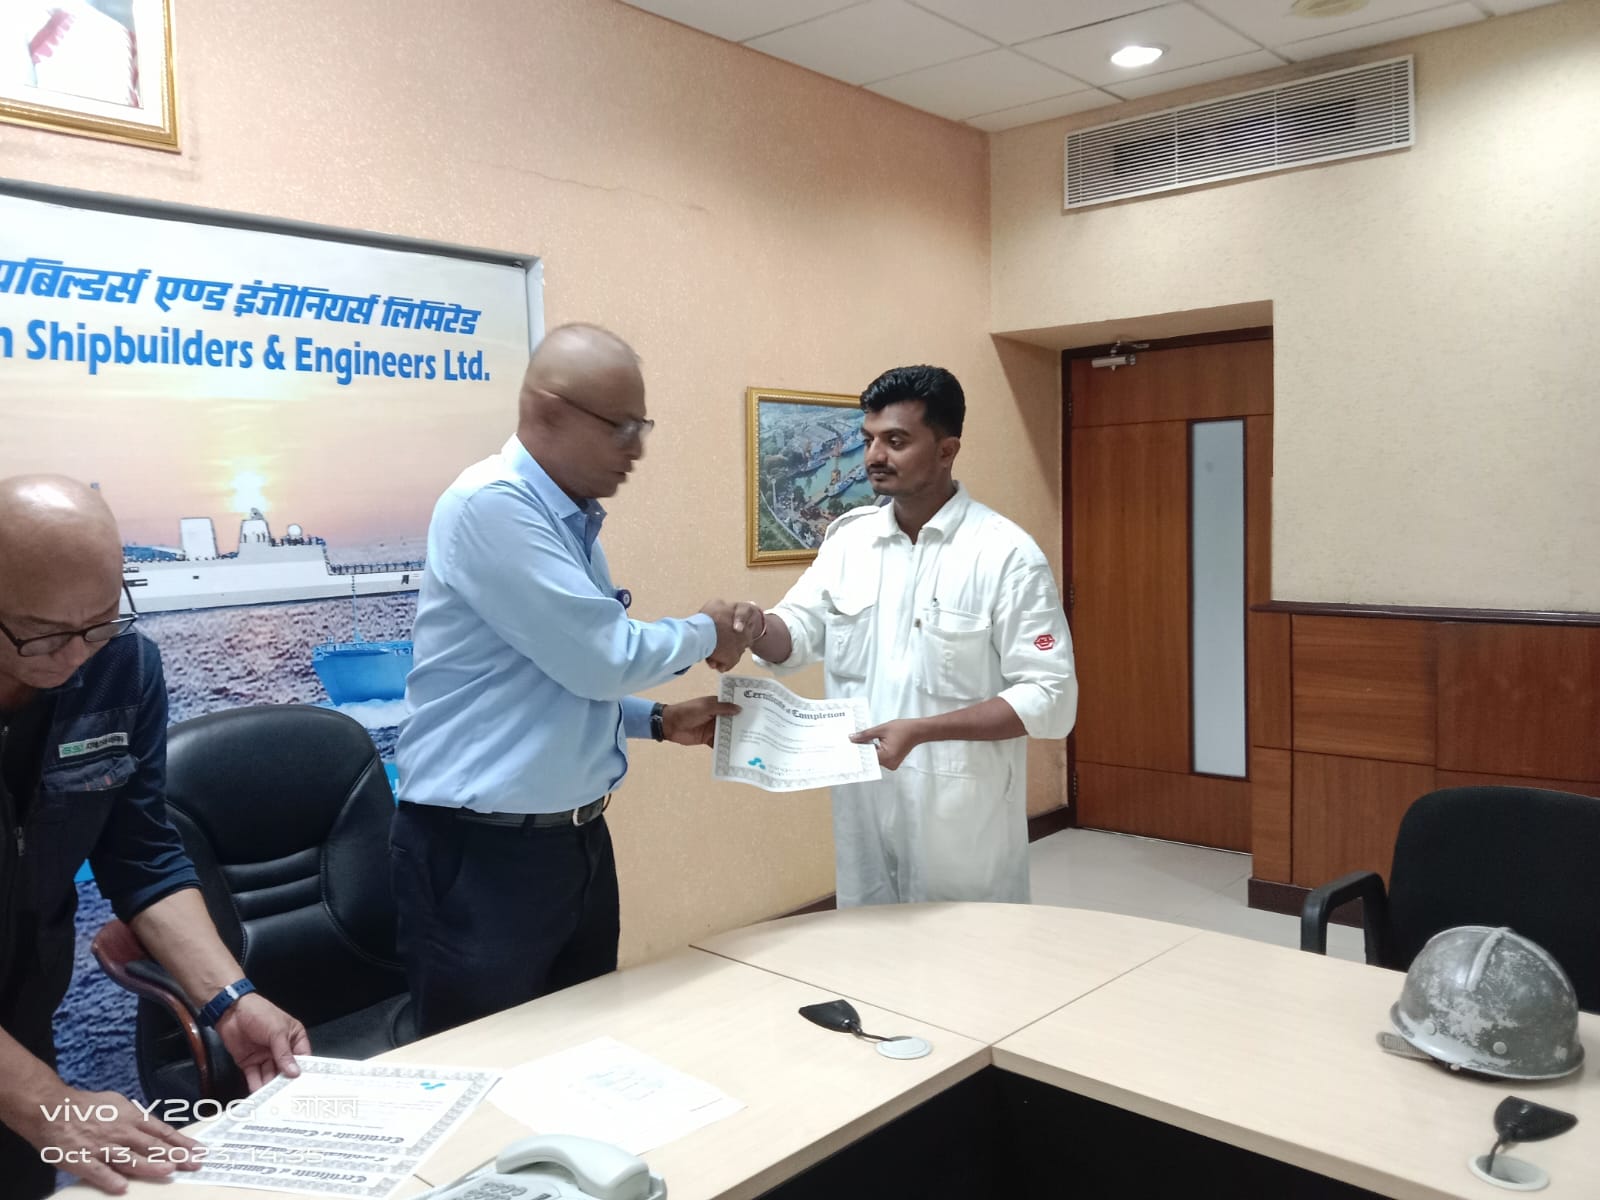 Certificates awarded by CGM (Main Works) to GRSE employees for Completing Training on the 250-Ton Goliath Crane at the Main Unit on 13 Oct 23